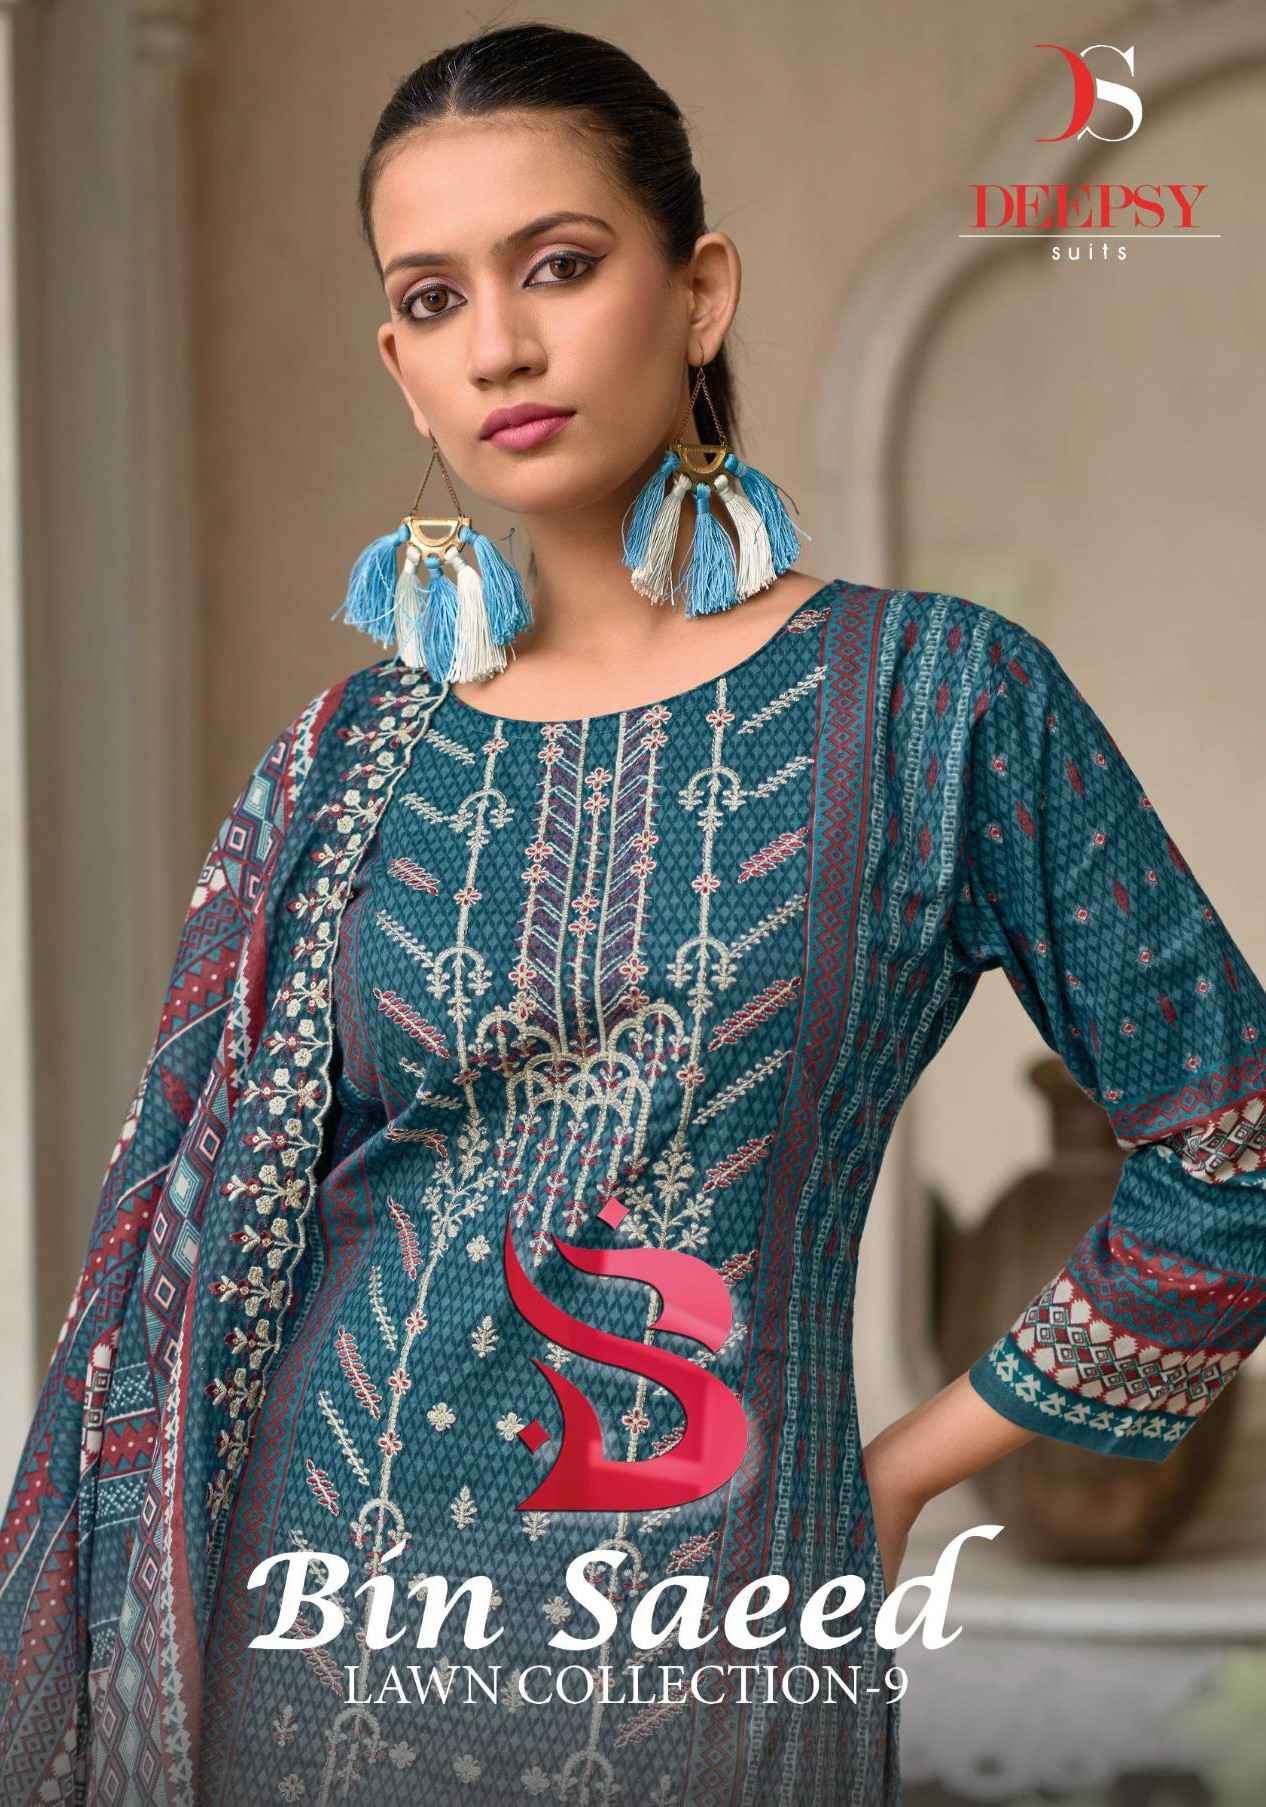 Deepsy Bin Saeed Lawn Collection Vol 9 cotton with Printed P...